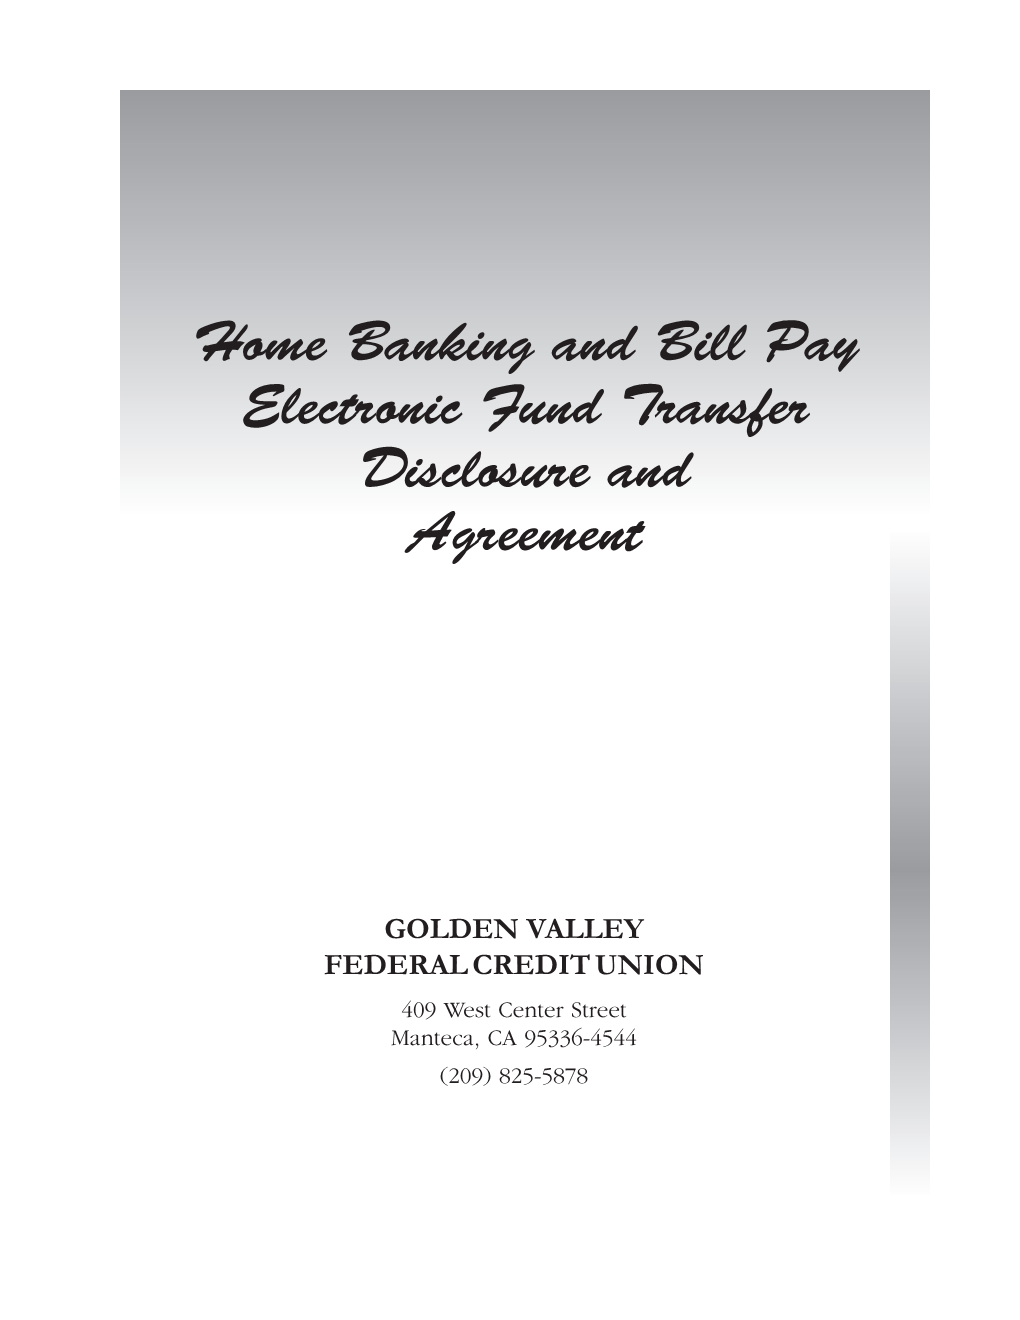 Home Banking and Bill Pay Electronic Fund Transfer Disclosure and Agreement